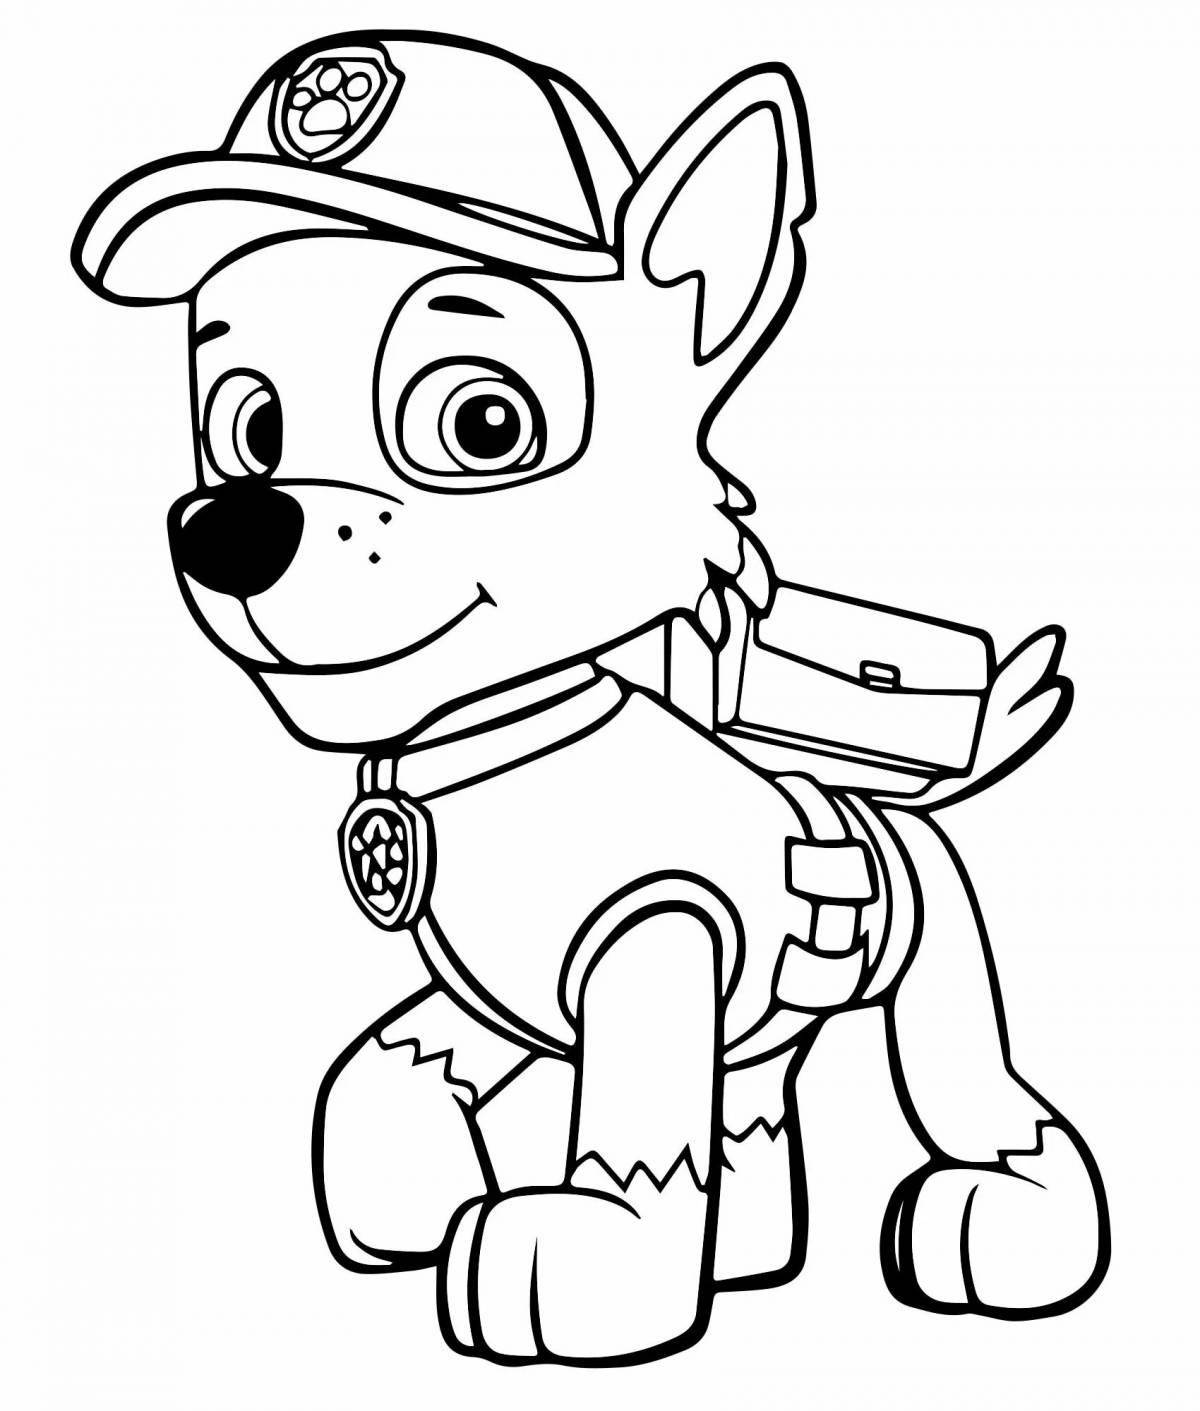 Mega marshal awesome coloring book